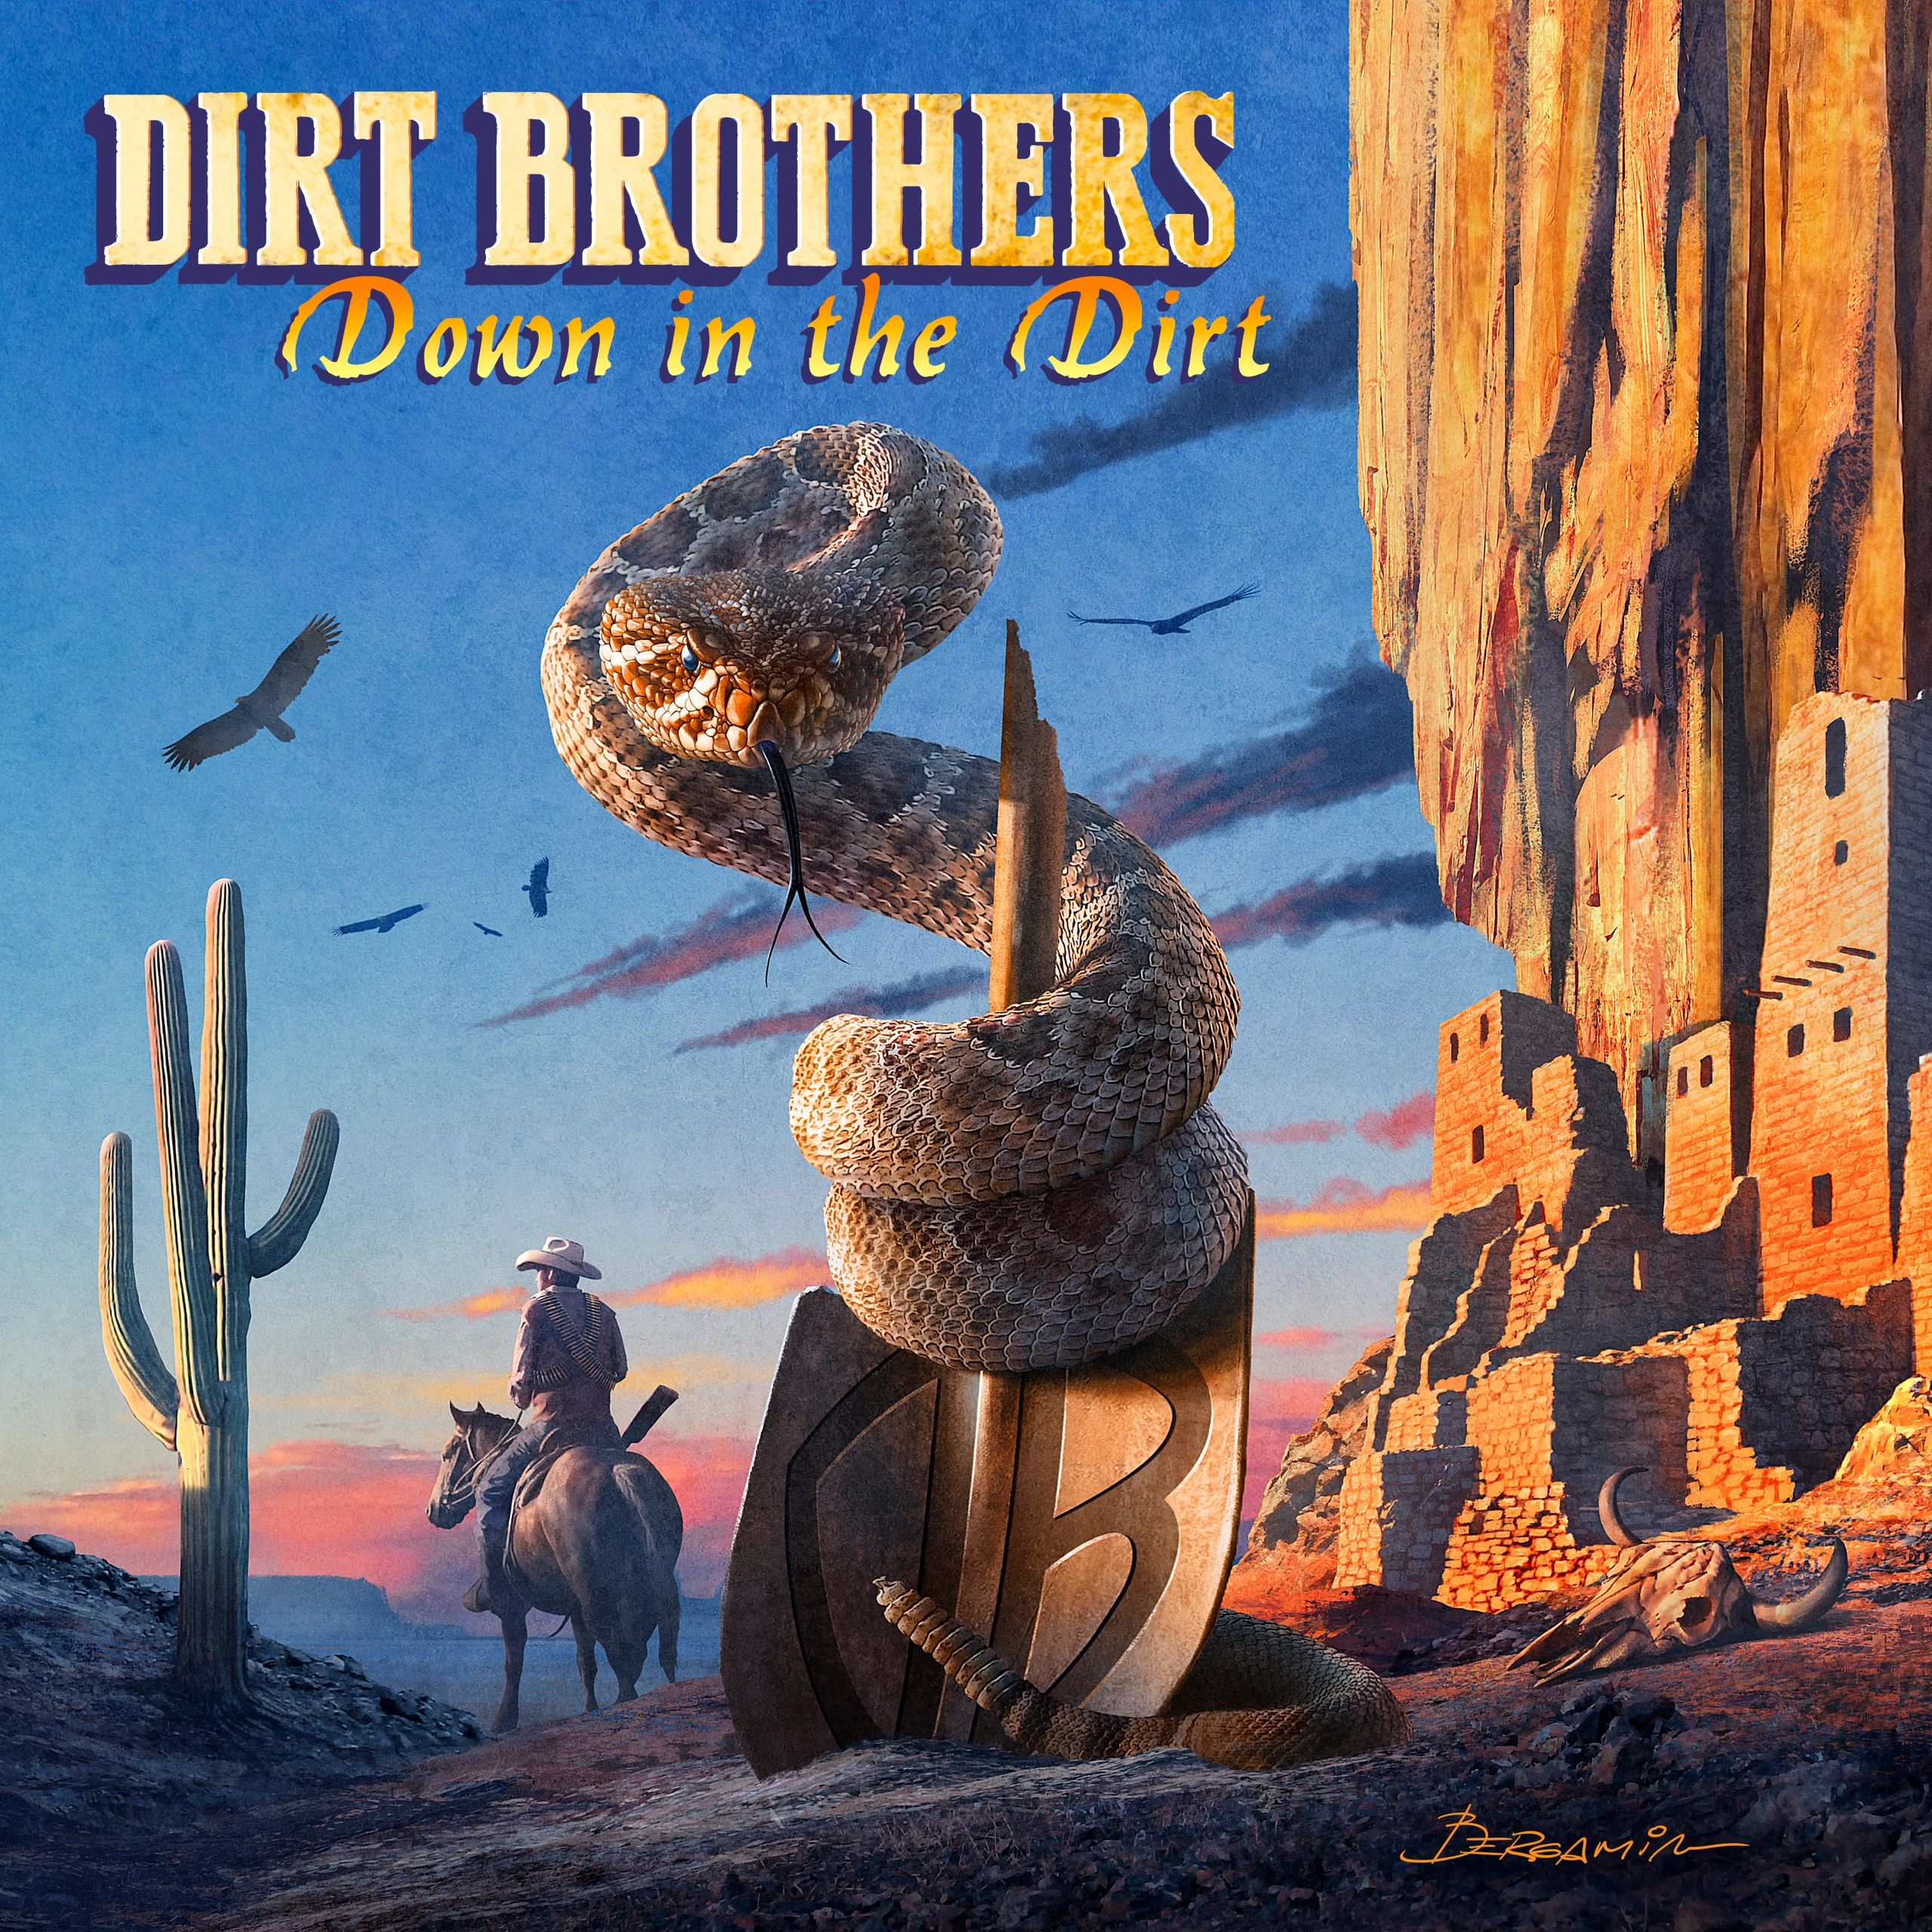 Dirt Brothers Album "Down in the Dirt"